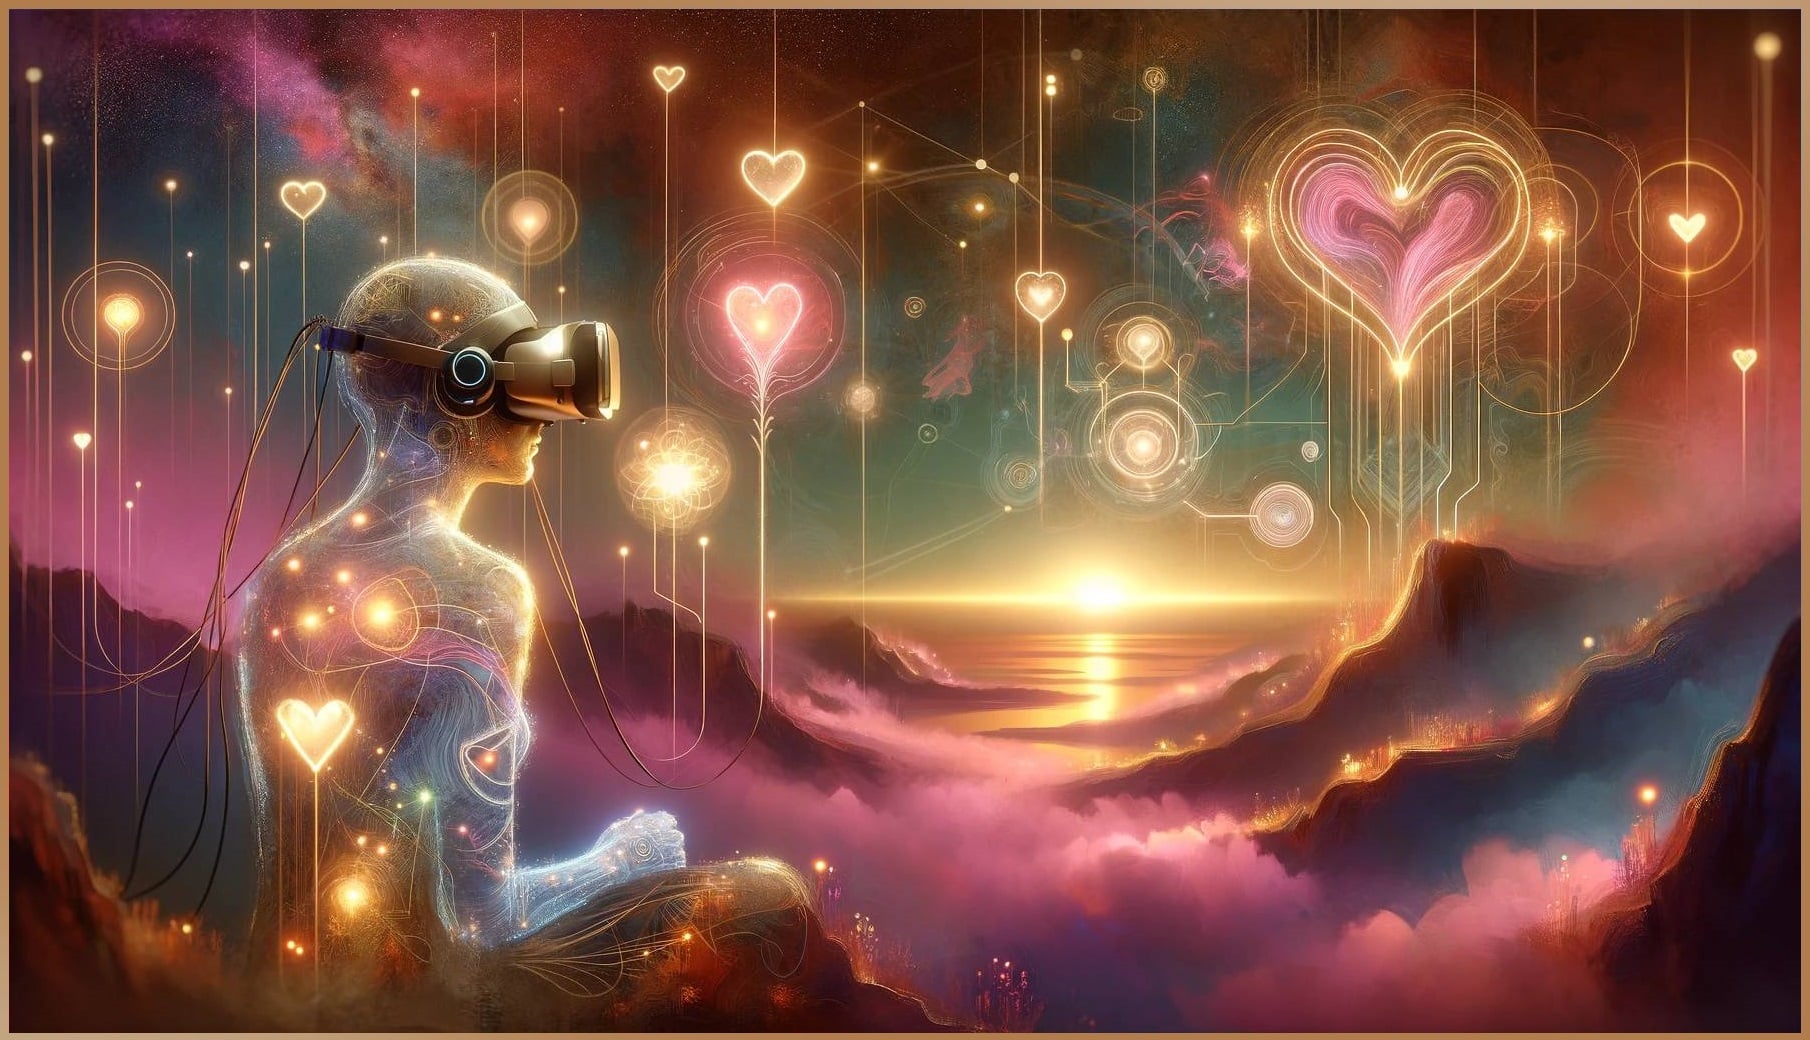 An individual exploring sexual wellness in a romantic, virtual reality environment, highlighted by ethereal landscapes and symbols of love and connection.